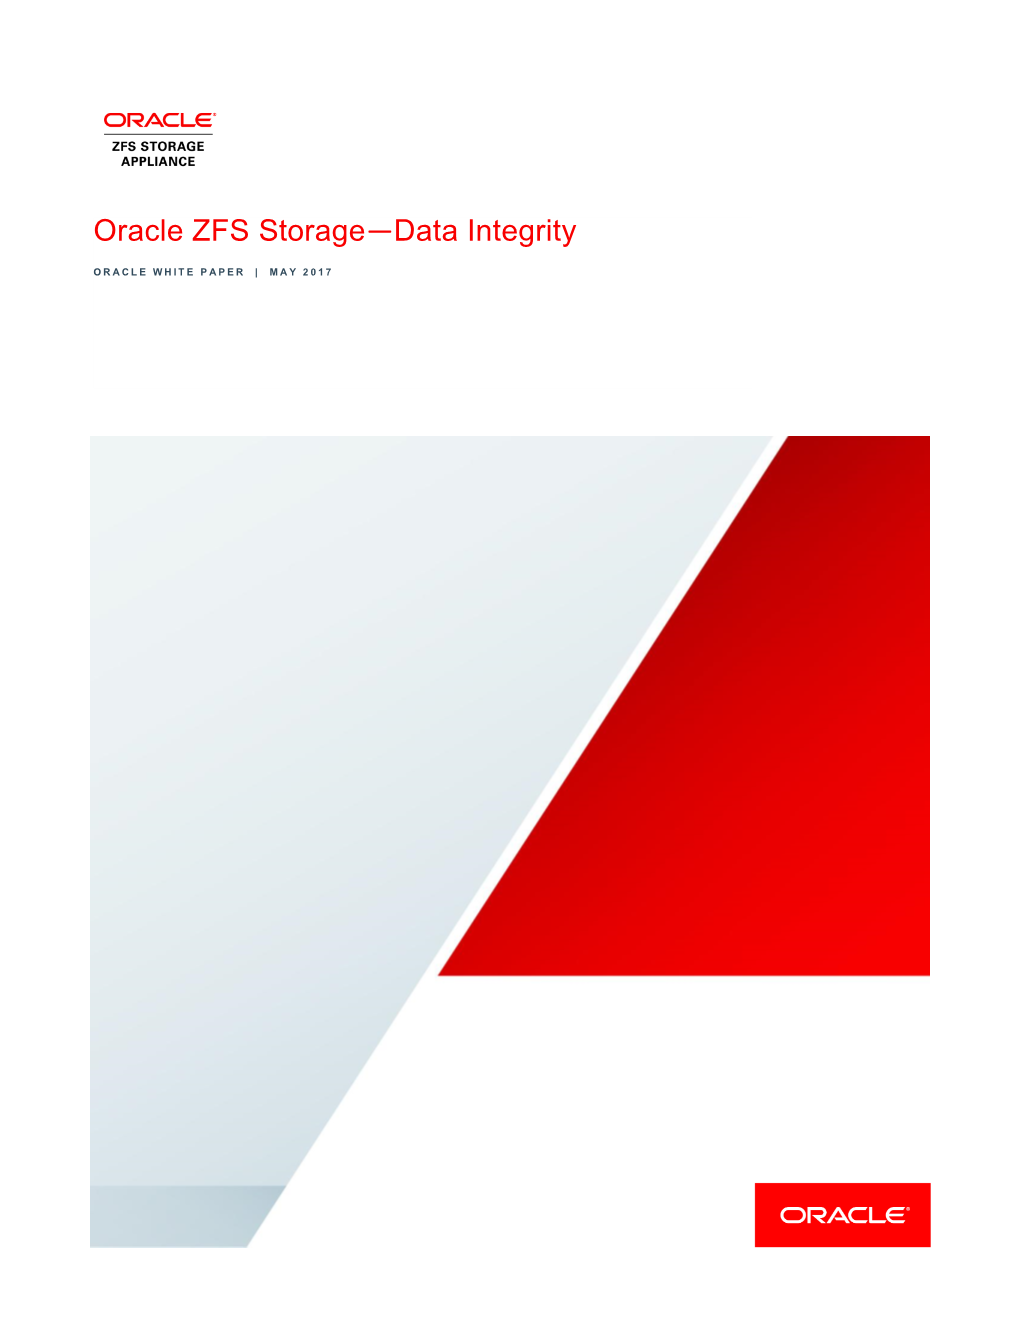 Oracle ZFS Storage--Data Integrity White Paper